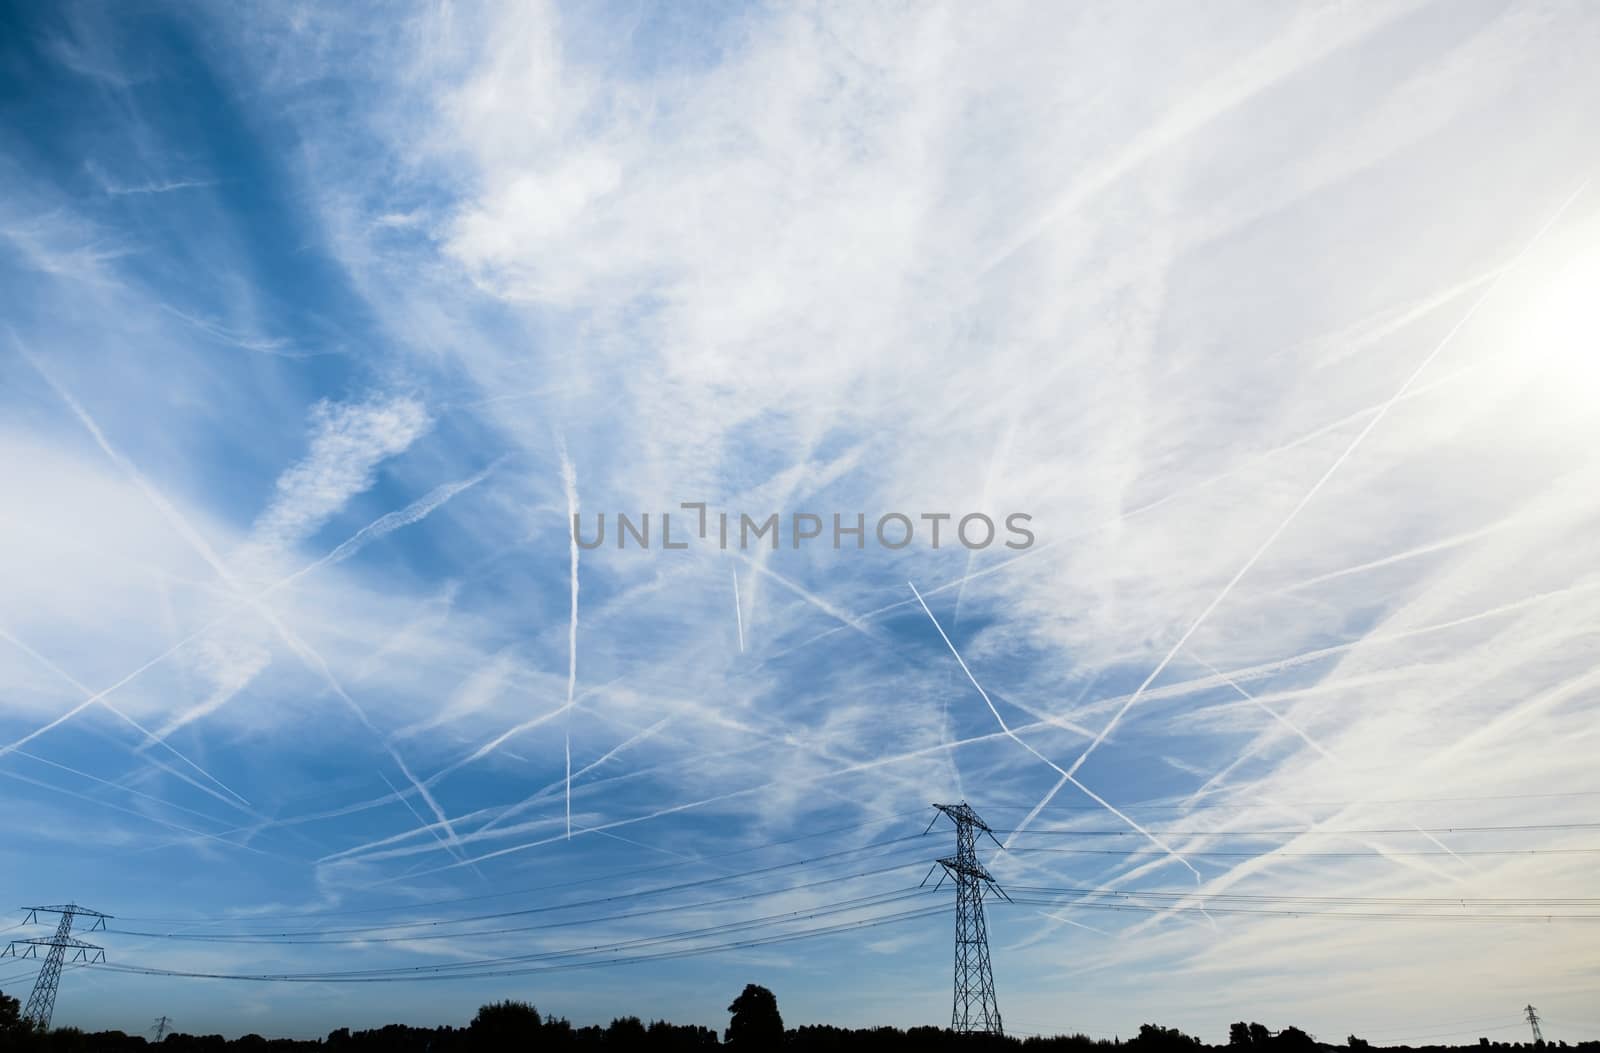 Chemtrails over the blue sky by svedoliver